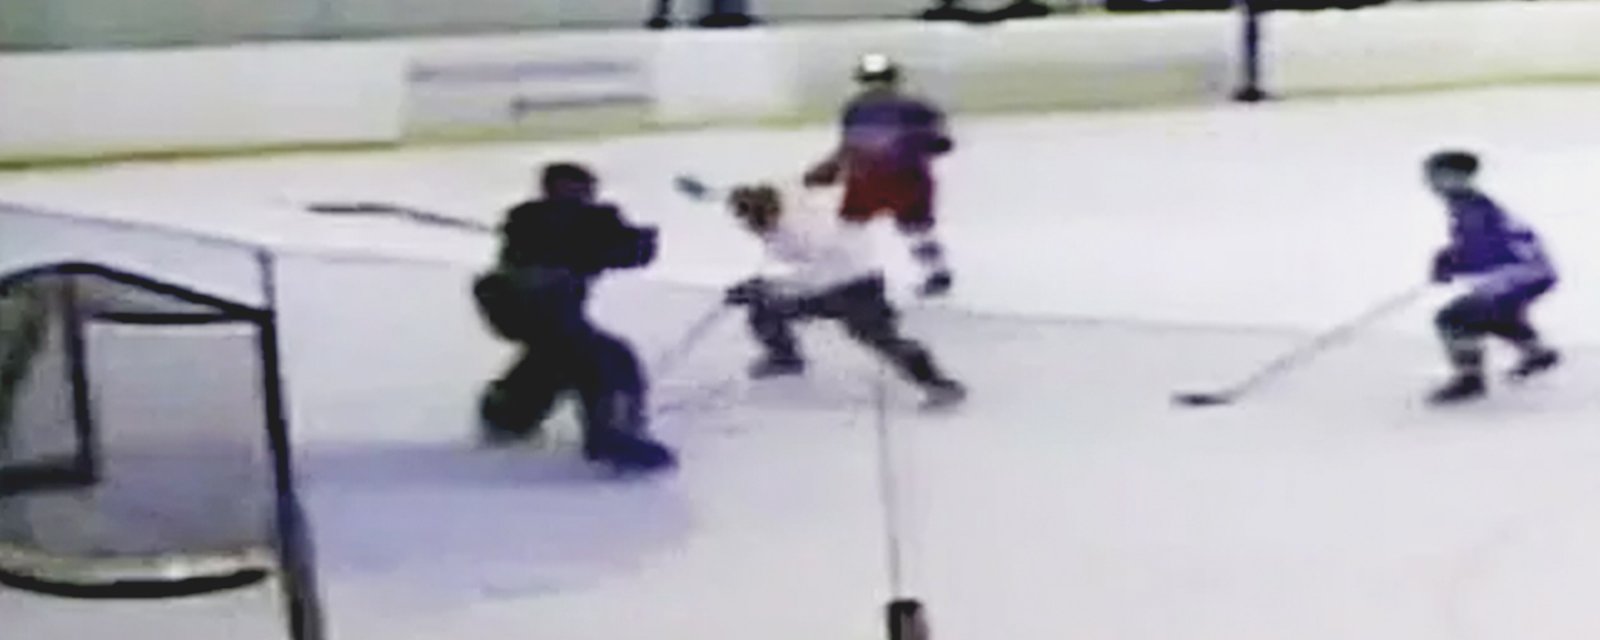 Video of a SHOCKING disgraceful on ice assault that sent goalie to jail!